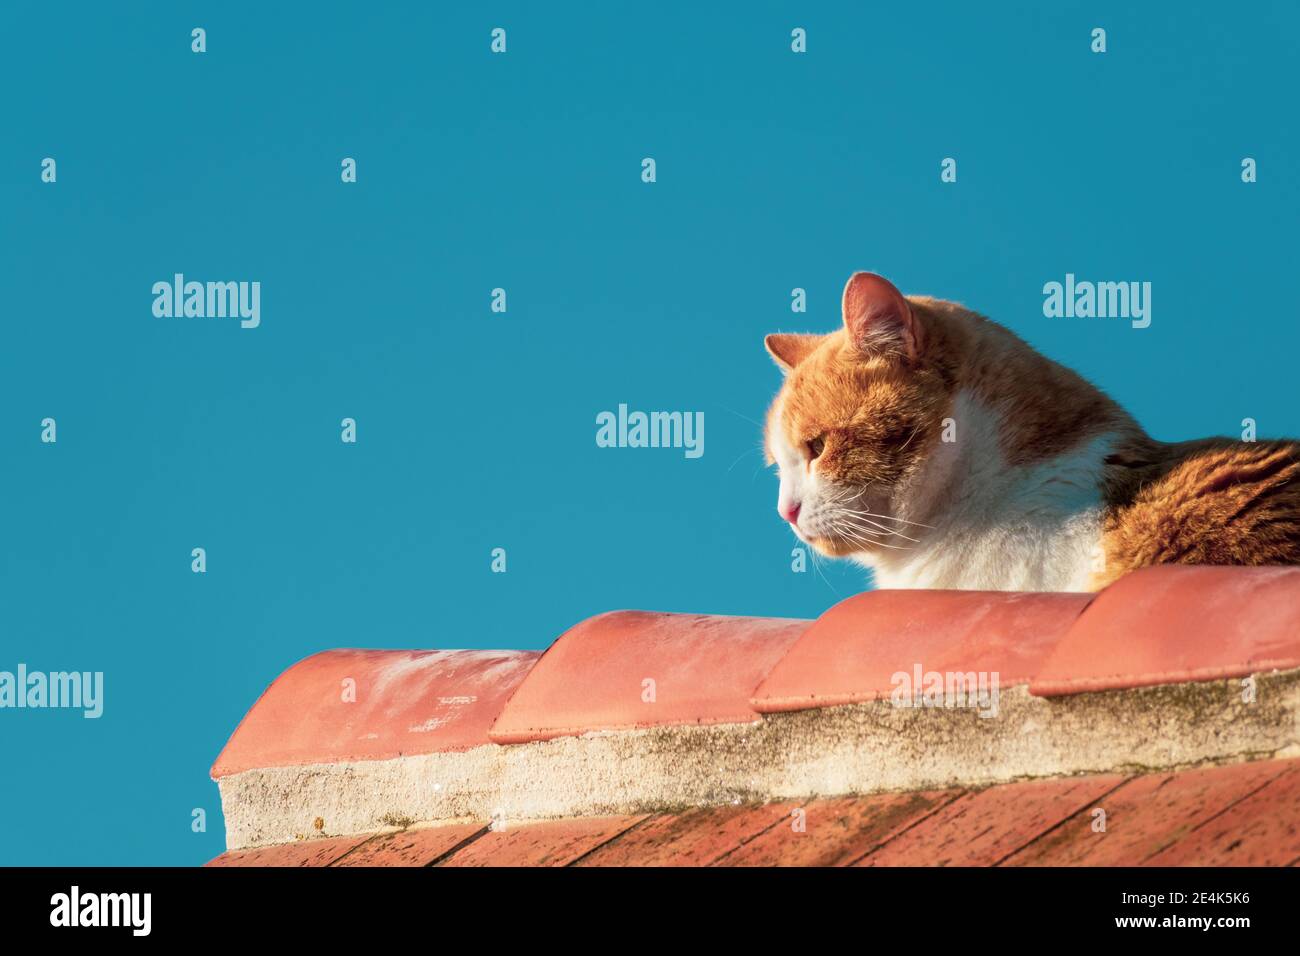 Detail of an orange cat on the tiles of a roof with the deep blue sky in the background Stock Photo